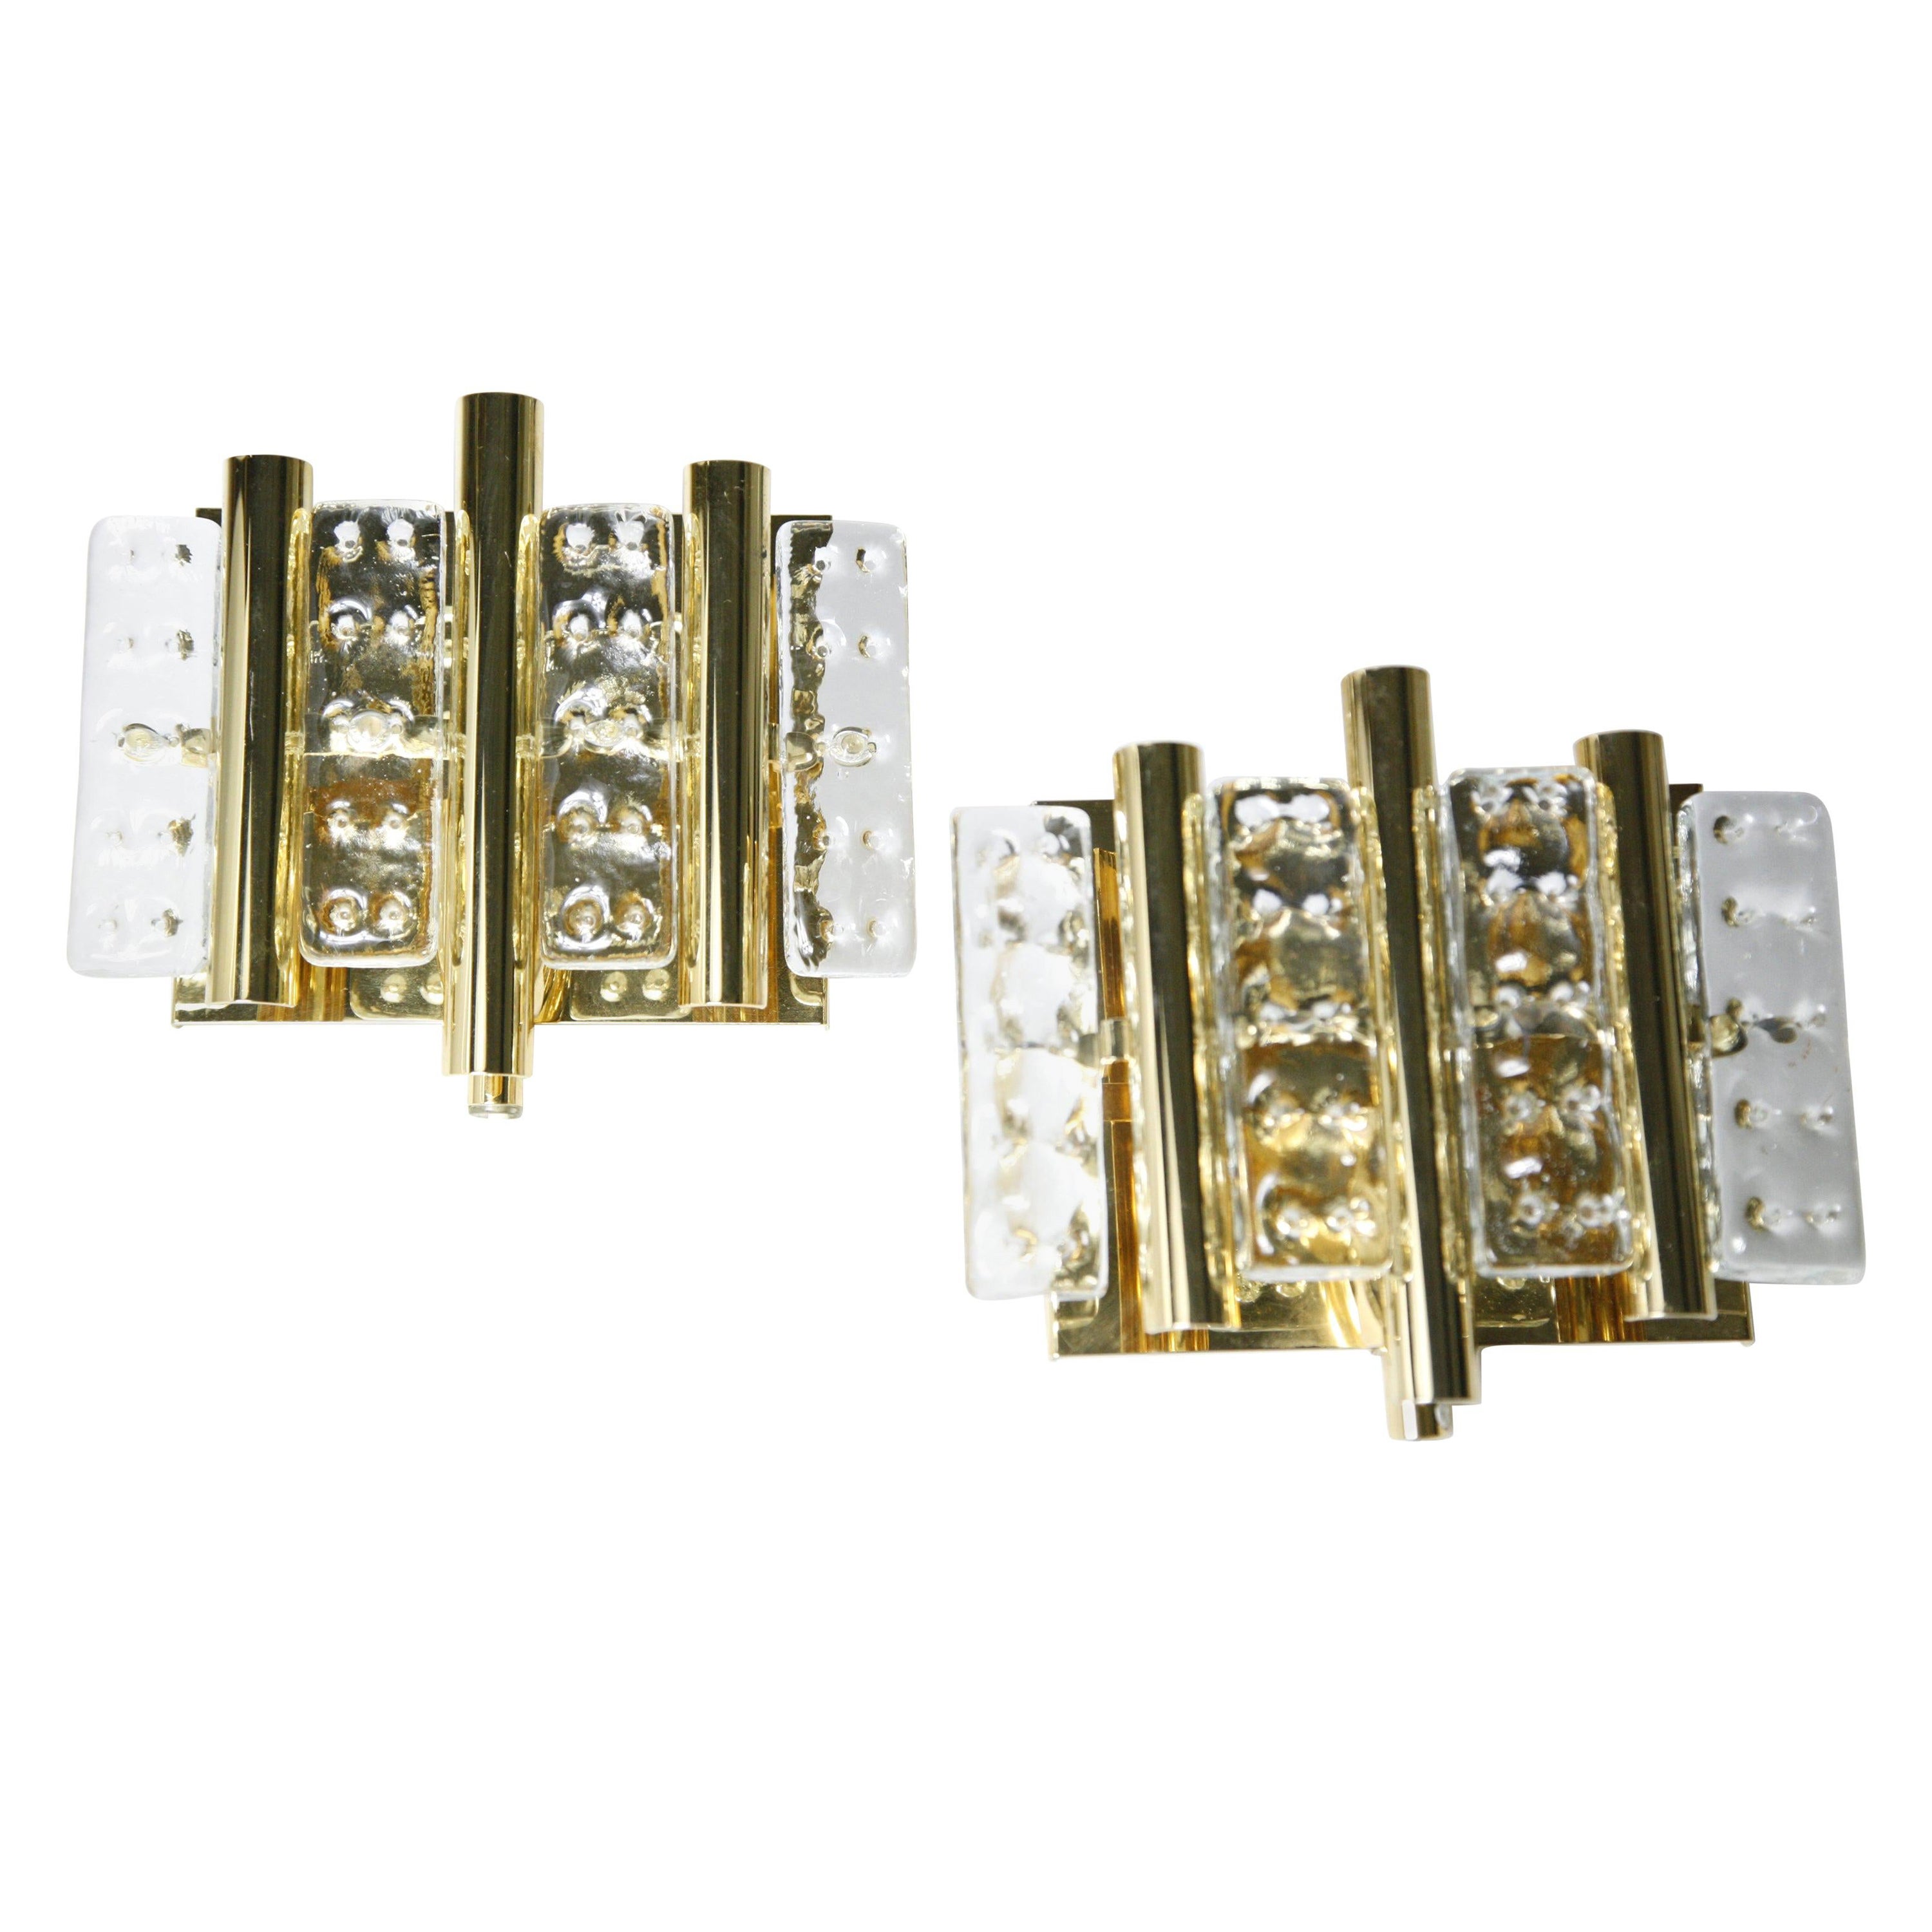 Pair of Flygsfors Brass Sconces Glass Elements, Sweden, 1970 For Sale